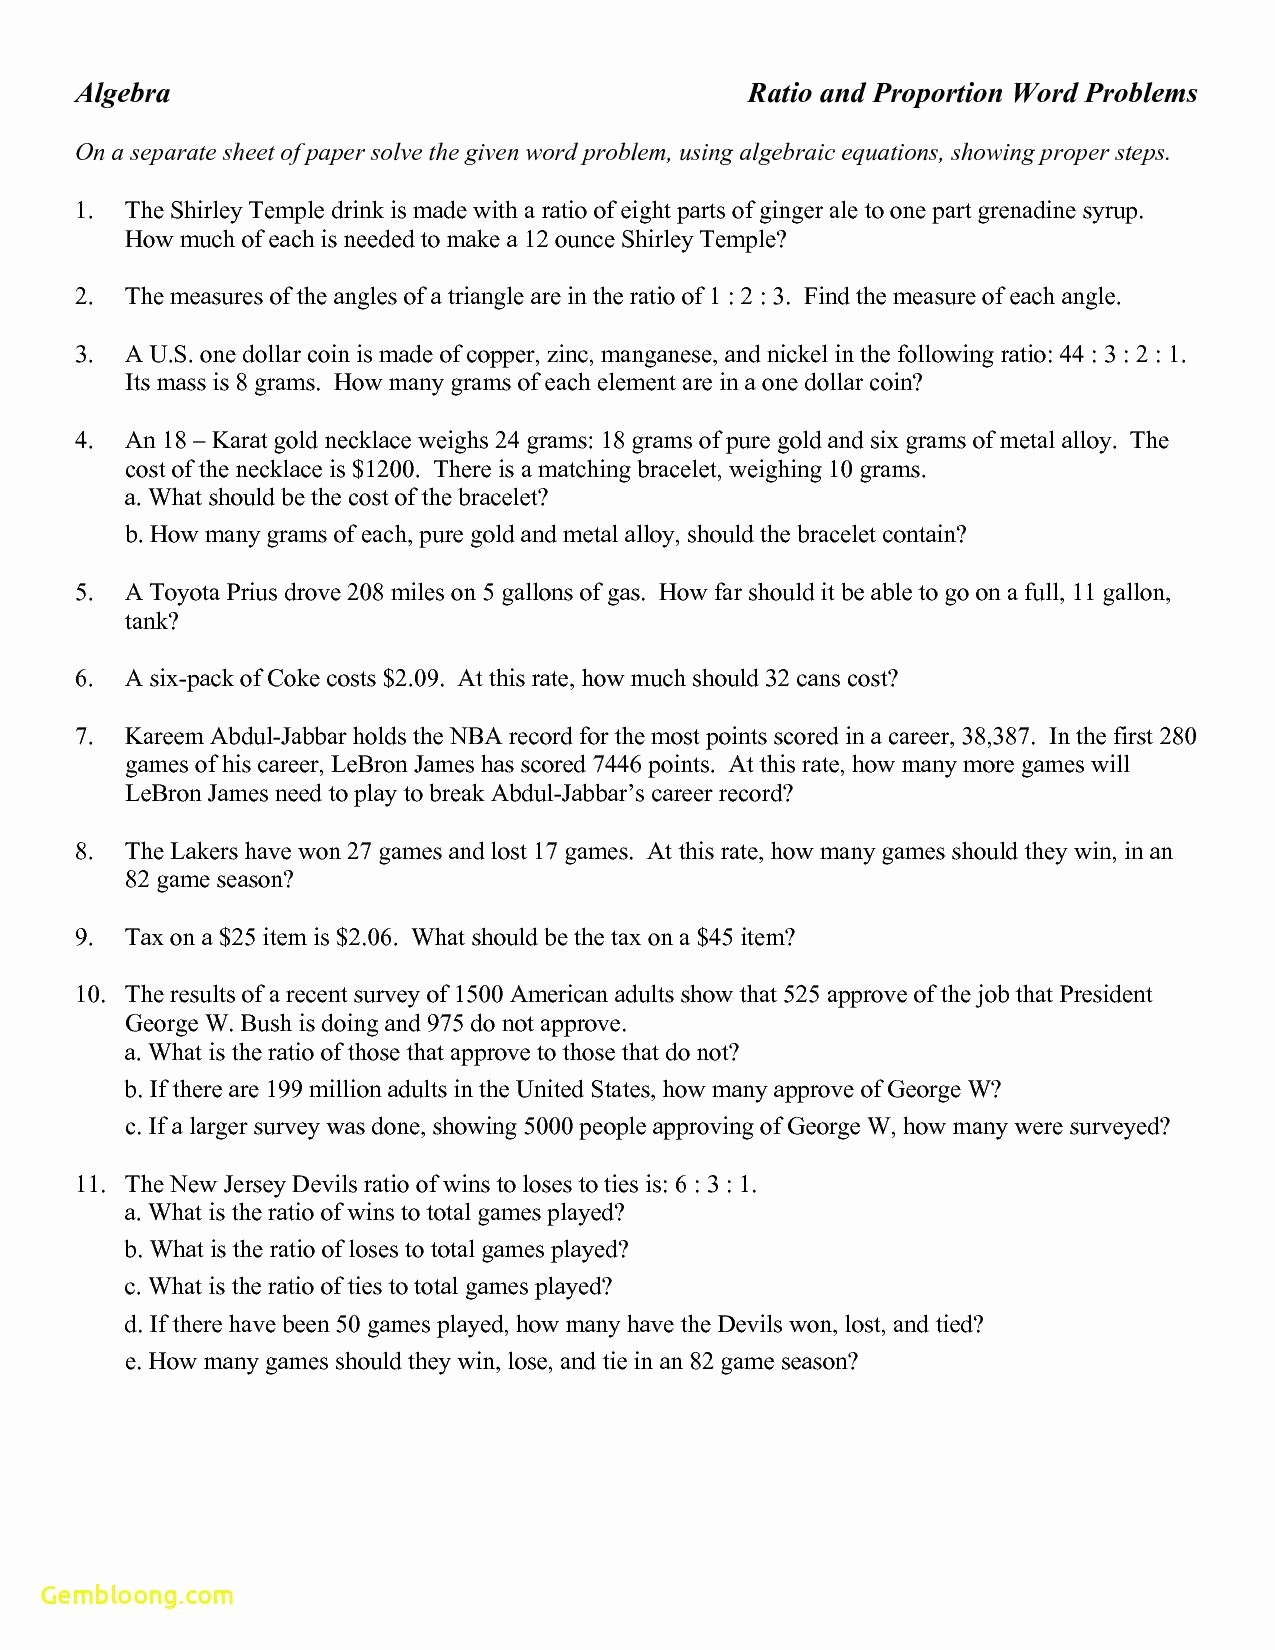 Ratio and Proportion Worksheet Pdf Luxury Ratio and Proportion Worksheet Pdf Cramerforcongress